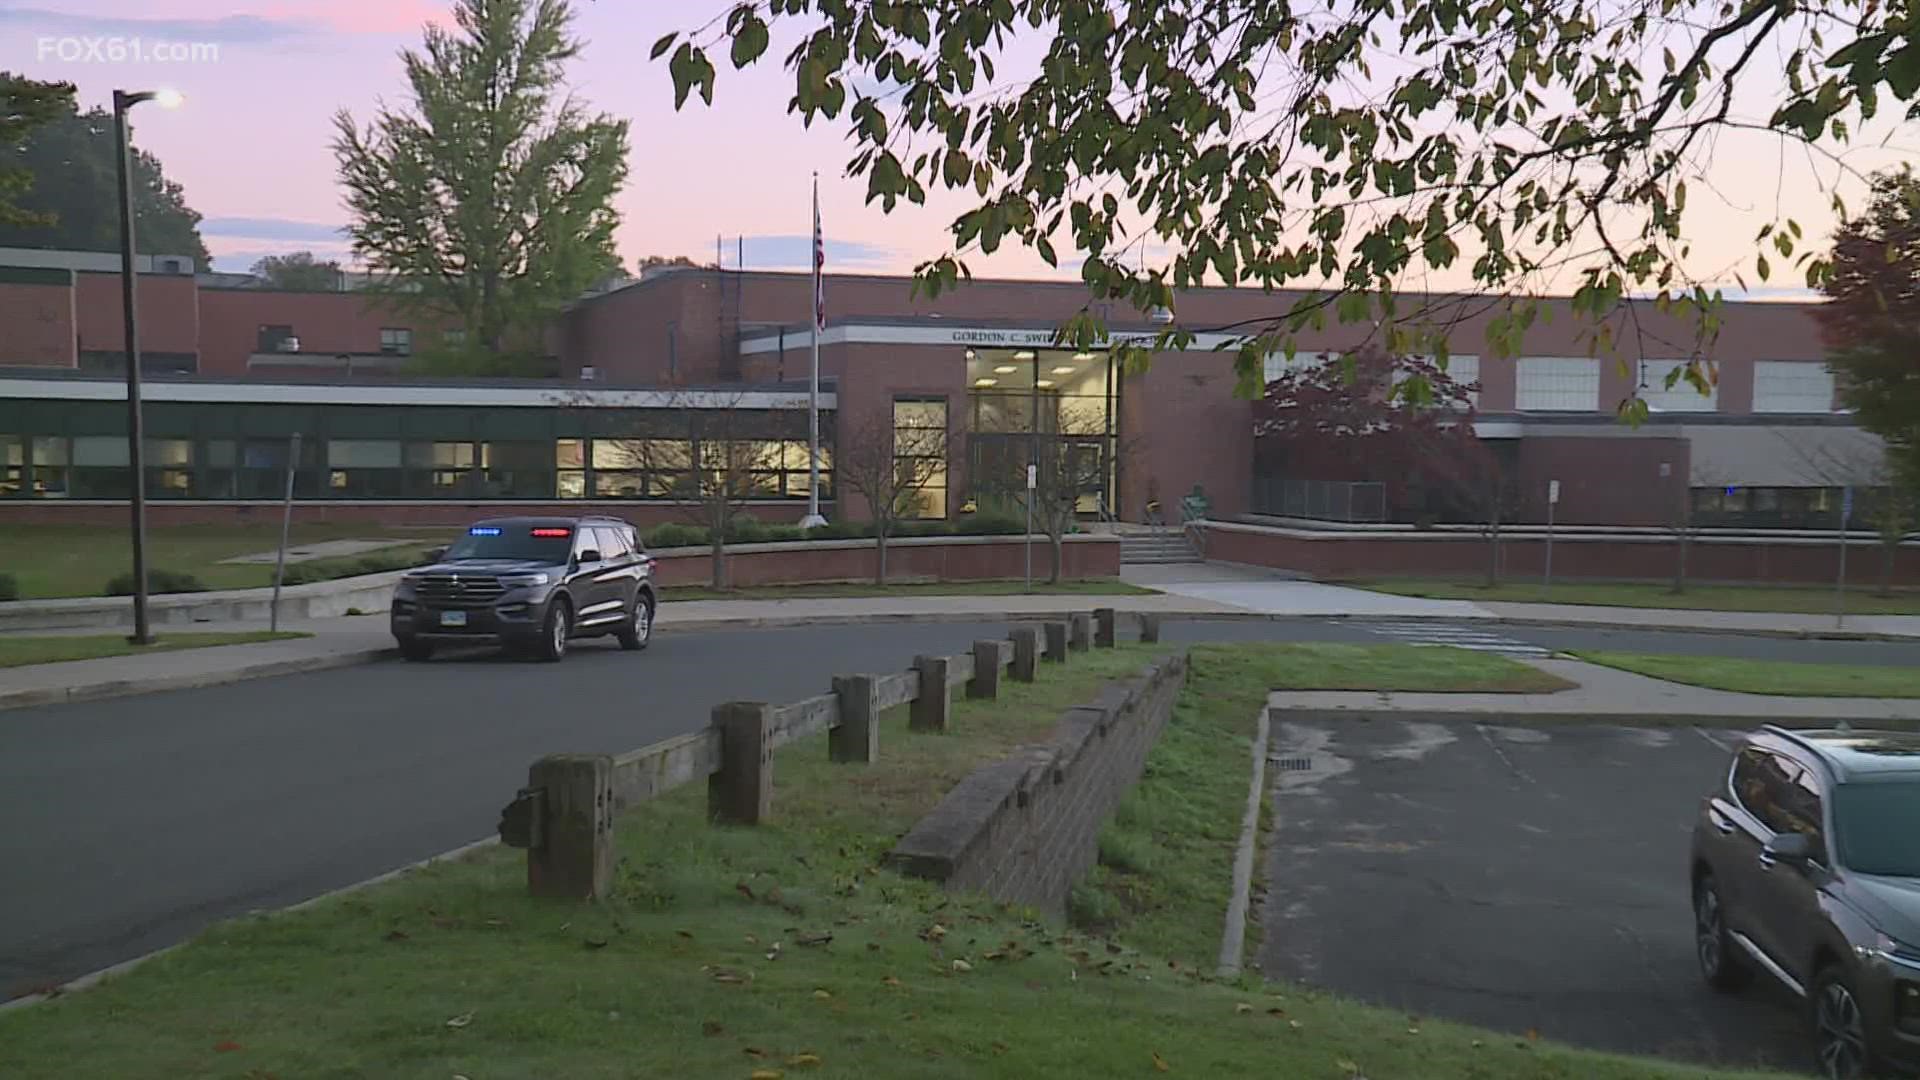 Swift Middle School had a delayed opening due to the investigation.